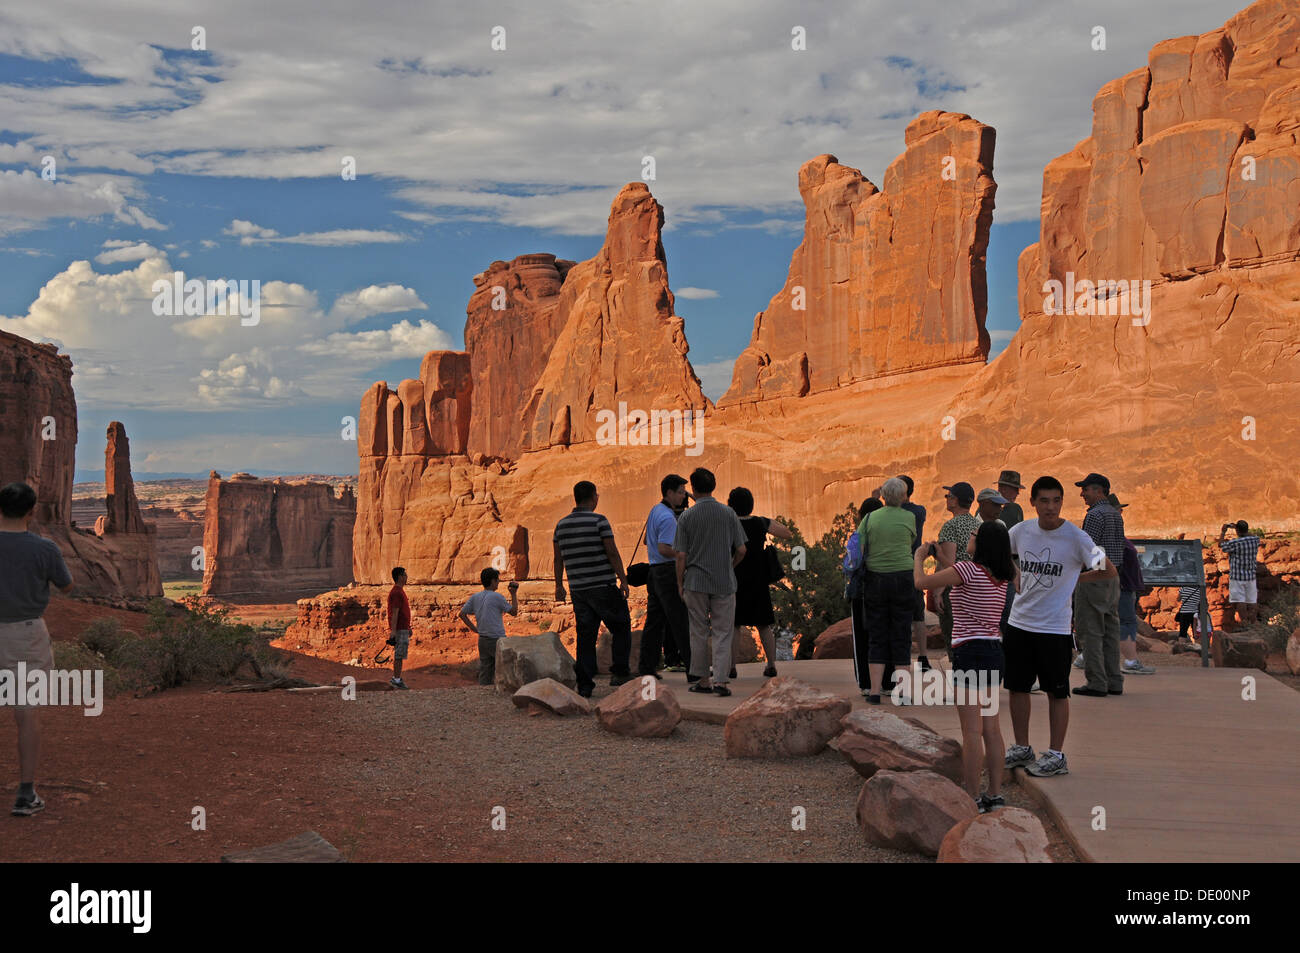 Visitors enjoying scenic view of Courthouse Towers in Arches National Park in Utah at sunrise Stock Photo